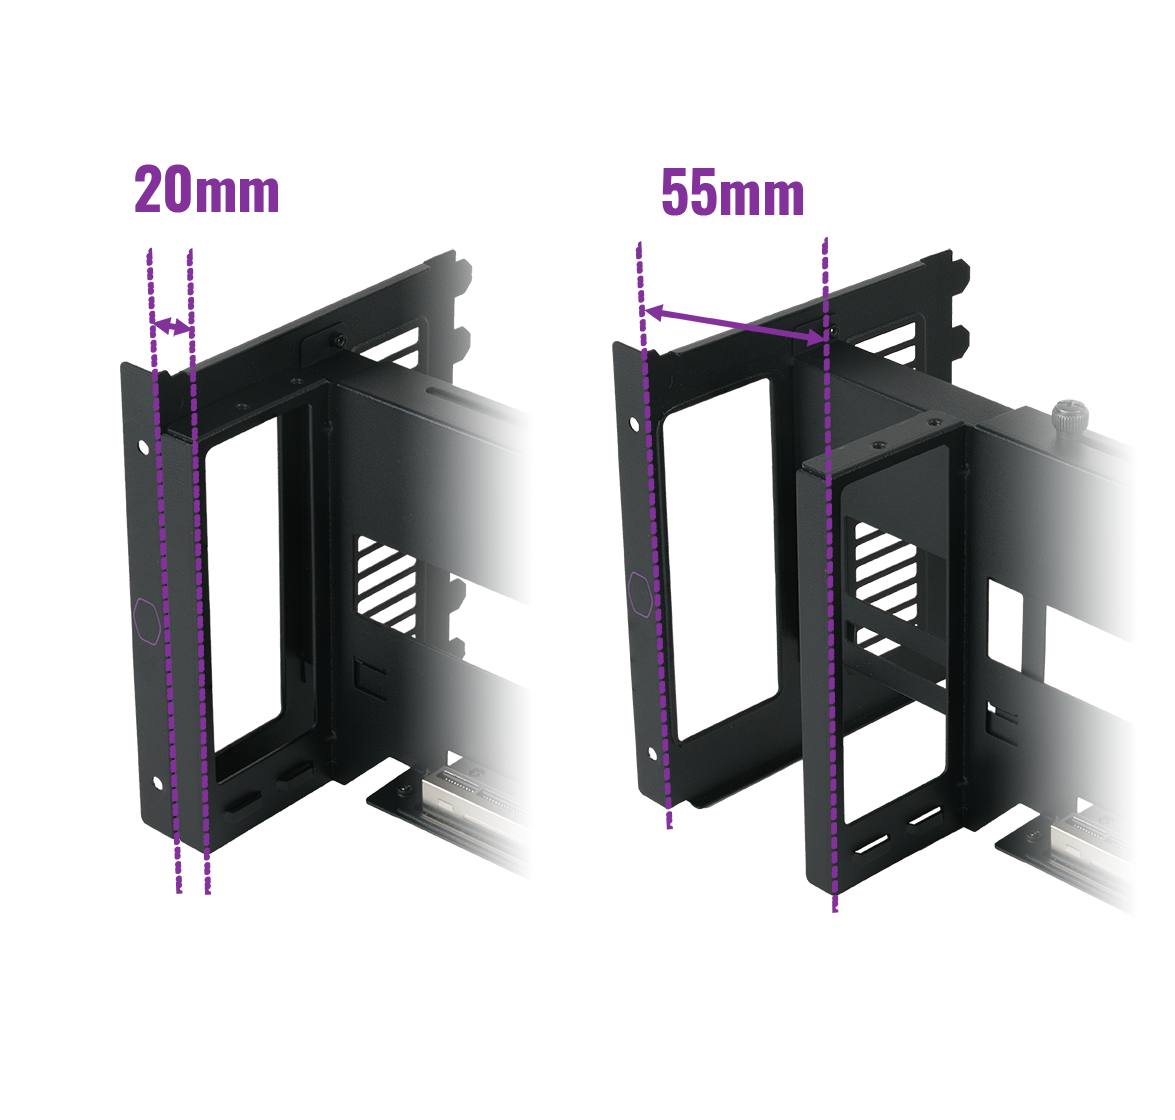 Cooler Master Universal Vertical Graphics Card Holder V2 with PCI-E Riser Cable Black MCA-U000R-KFVK01 | PCByte Malaysia